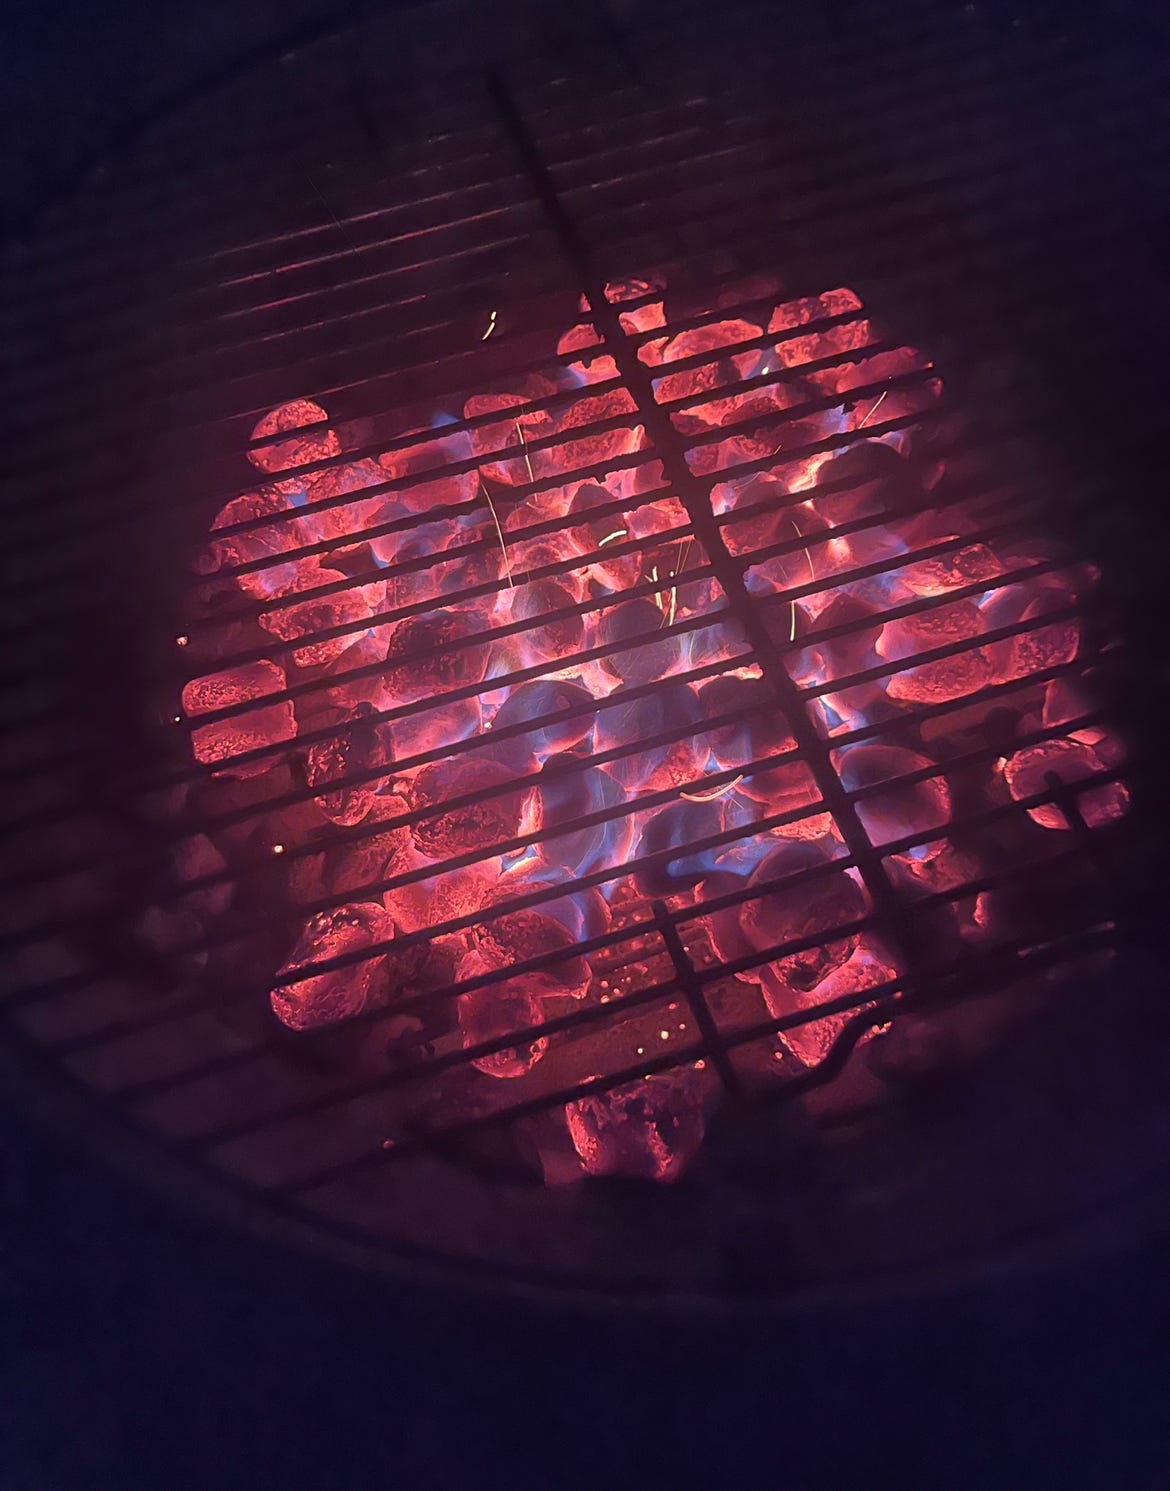 glowing coals in a barbecue